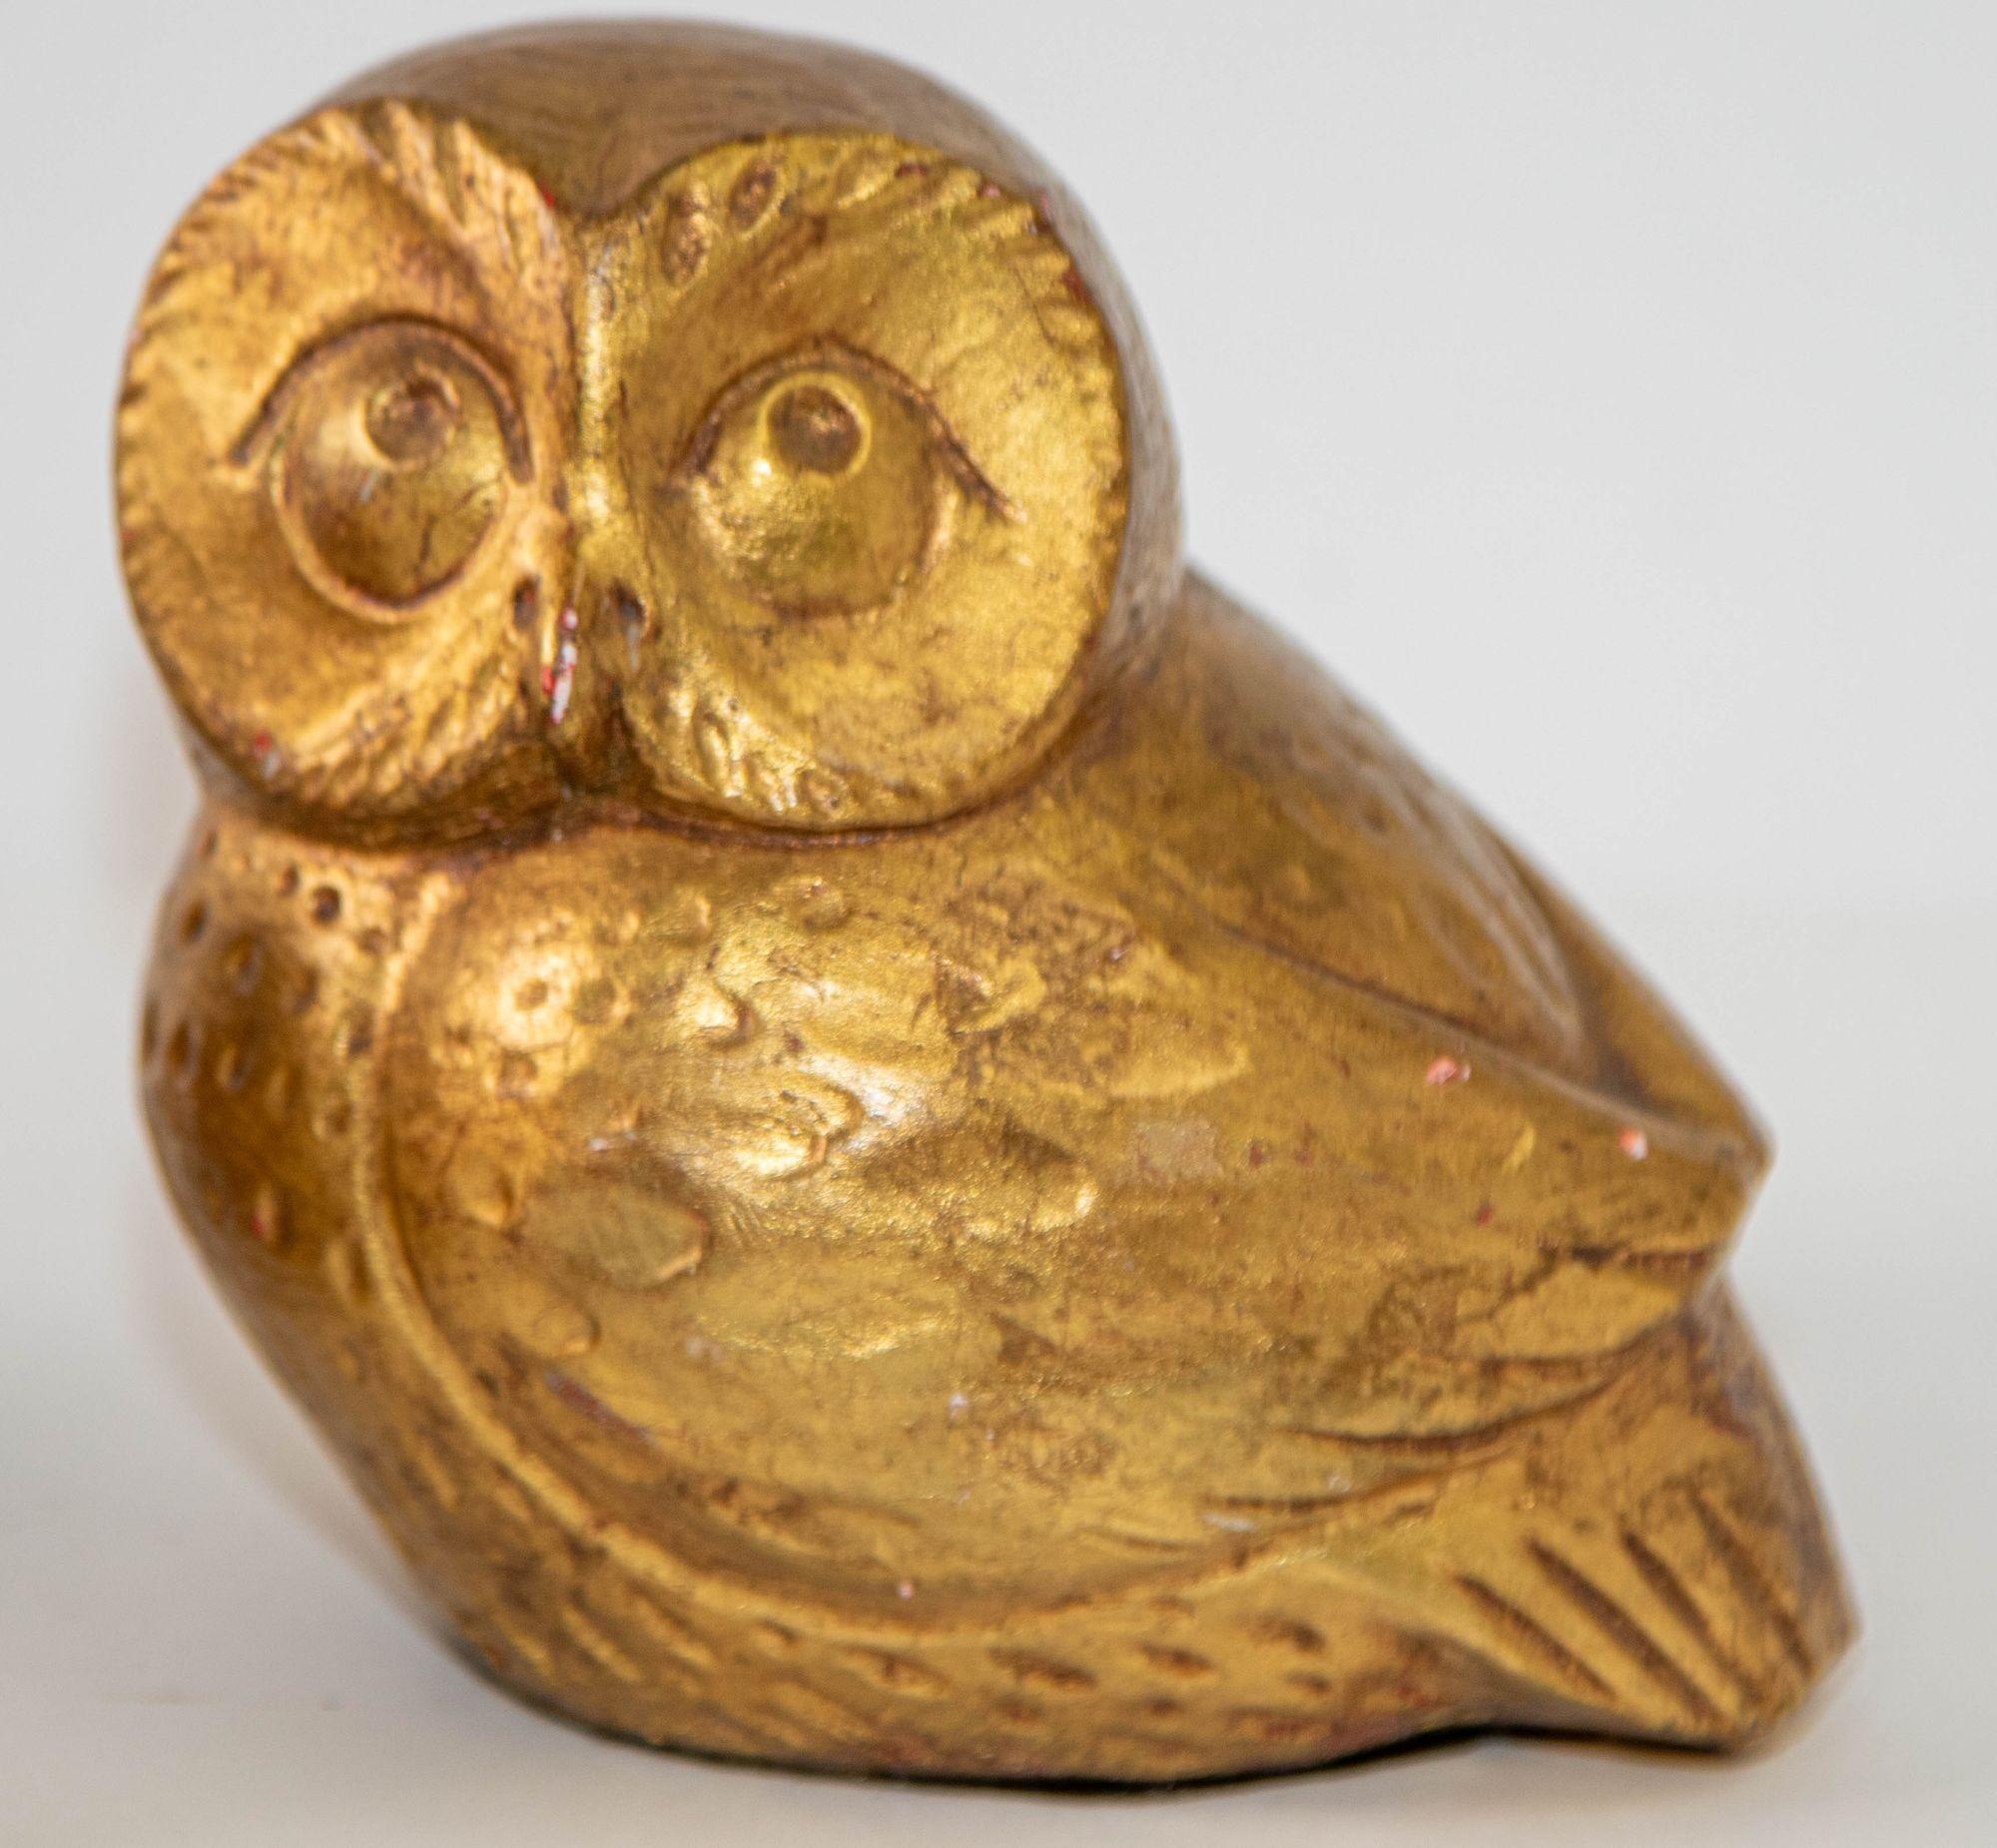 Vintage gilded owl figurines decorative bookends, or paperweights in 24k gold leaf Mid-Century Modern, 1960s.
These mother and baby owls the gold finish evokes the glamour of Hollywood Regency style.
The design and expression of the figurines fit